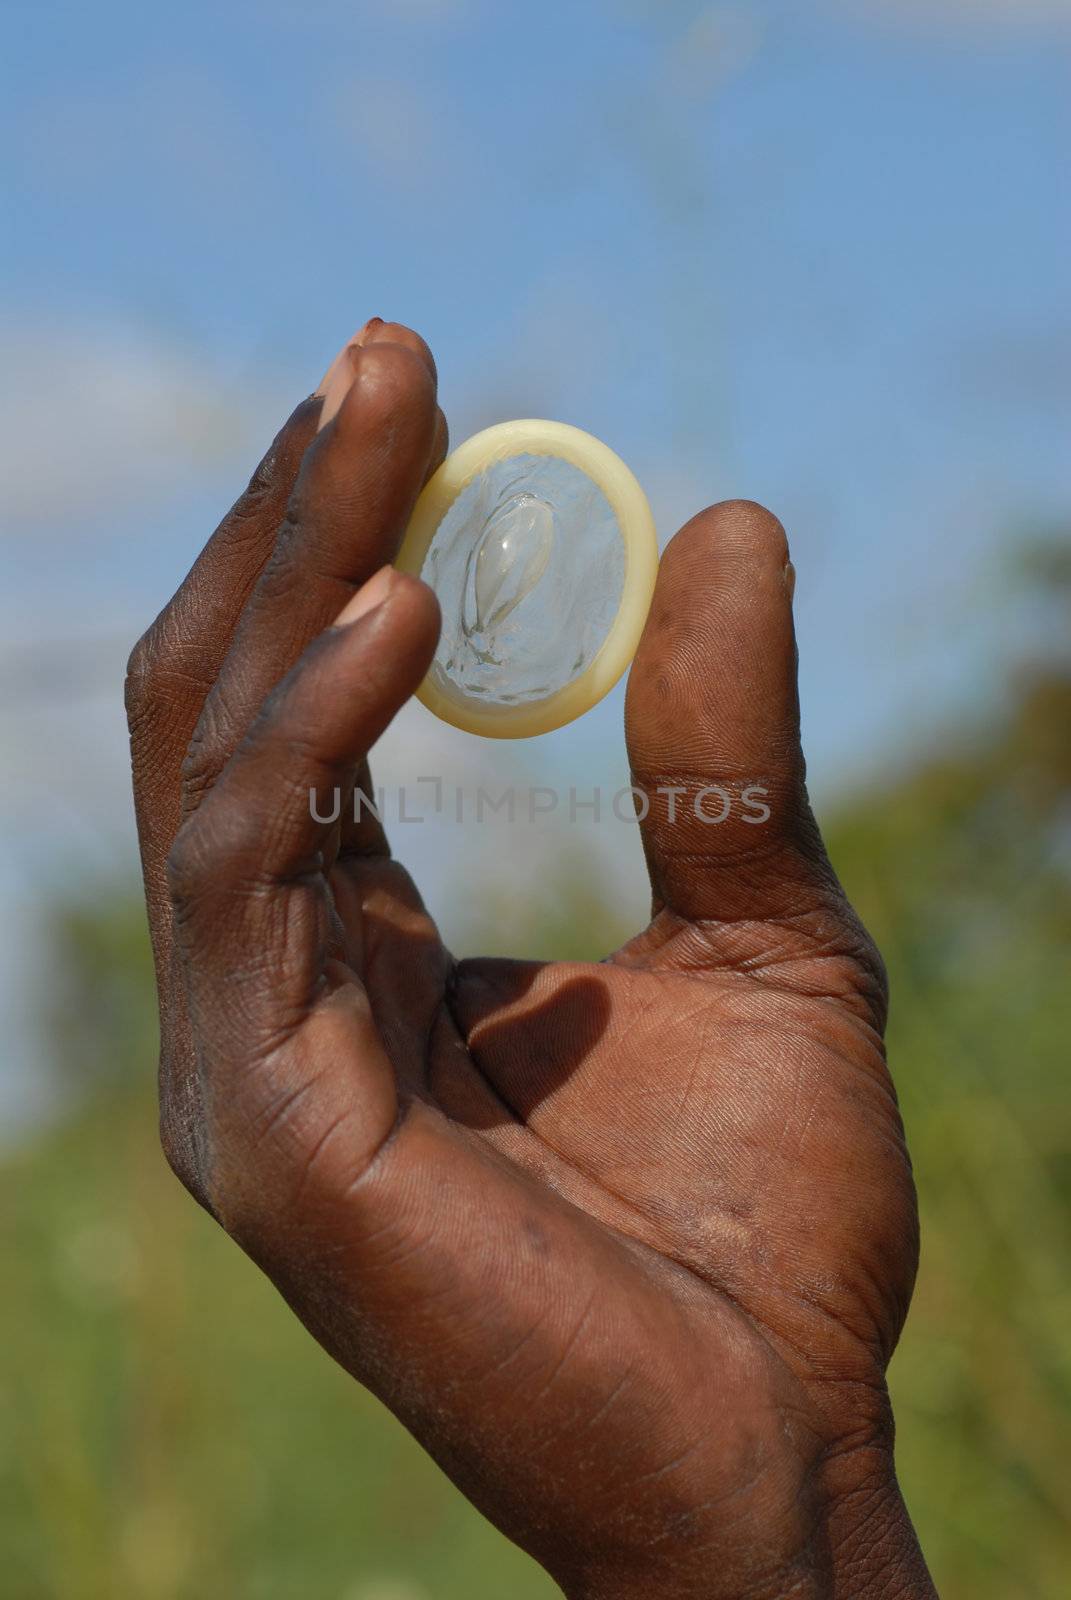 condom in the hands of an African